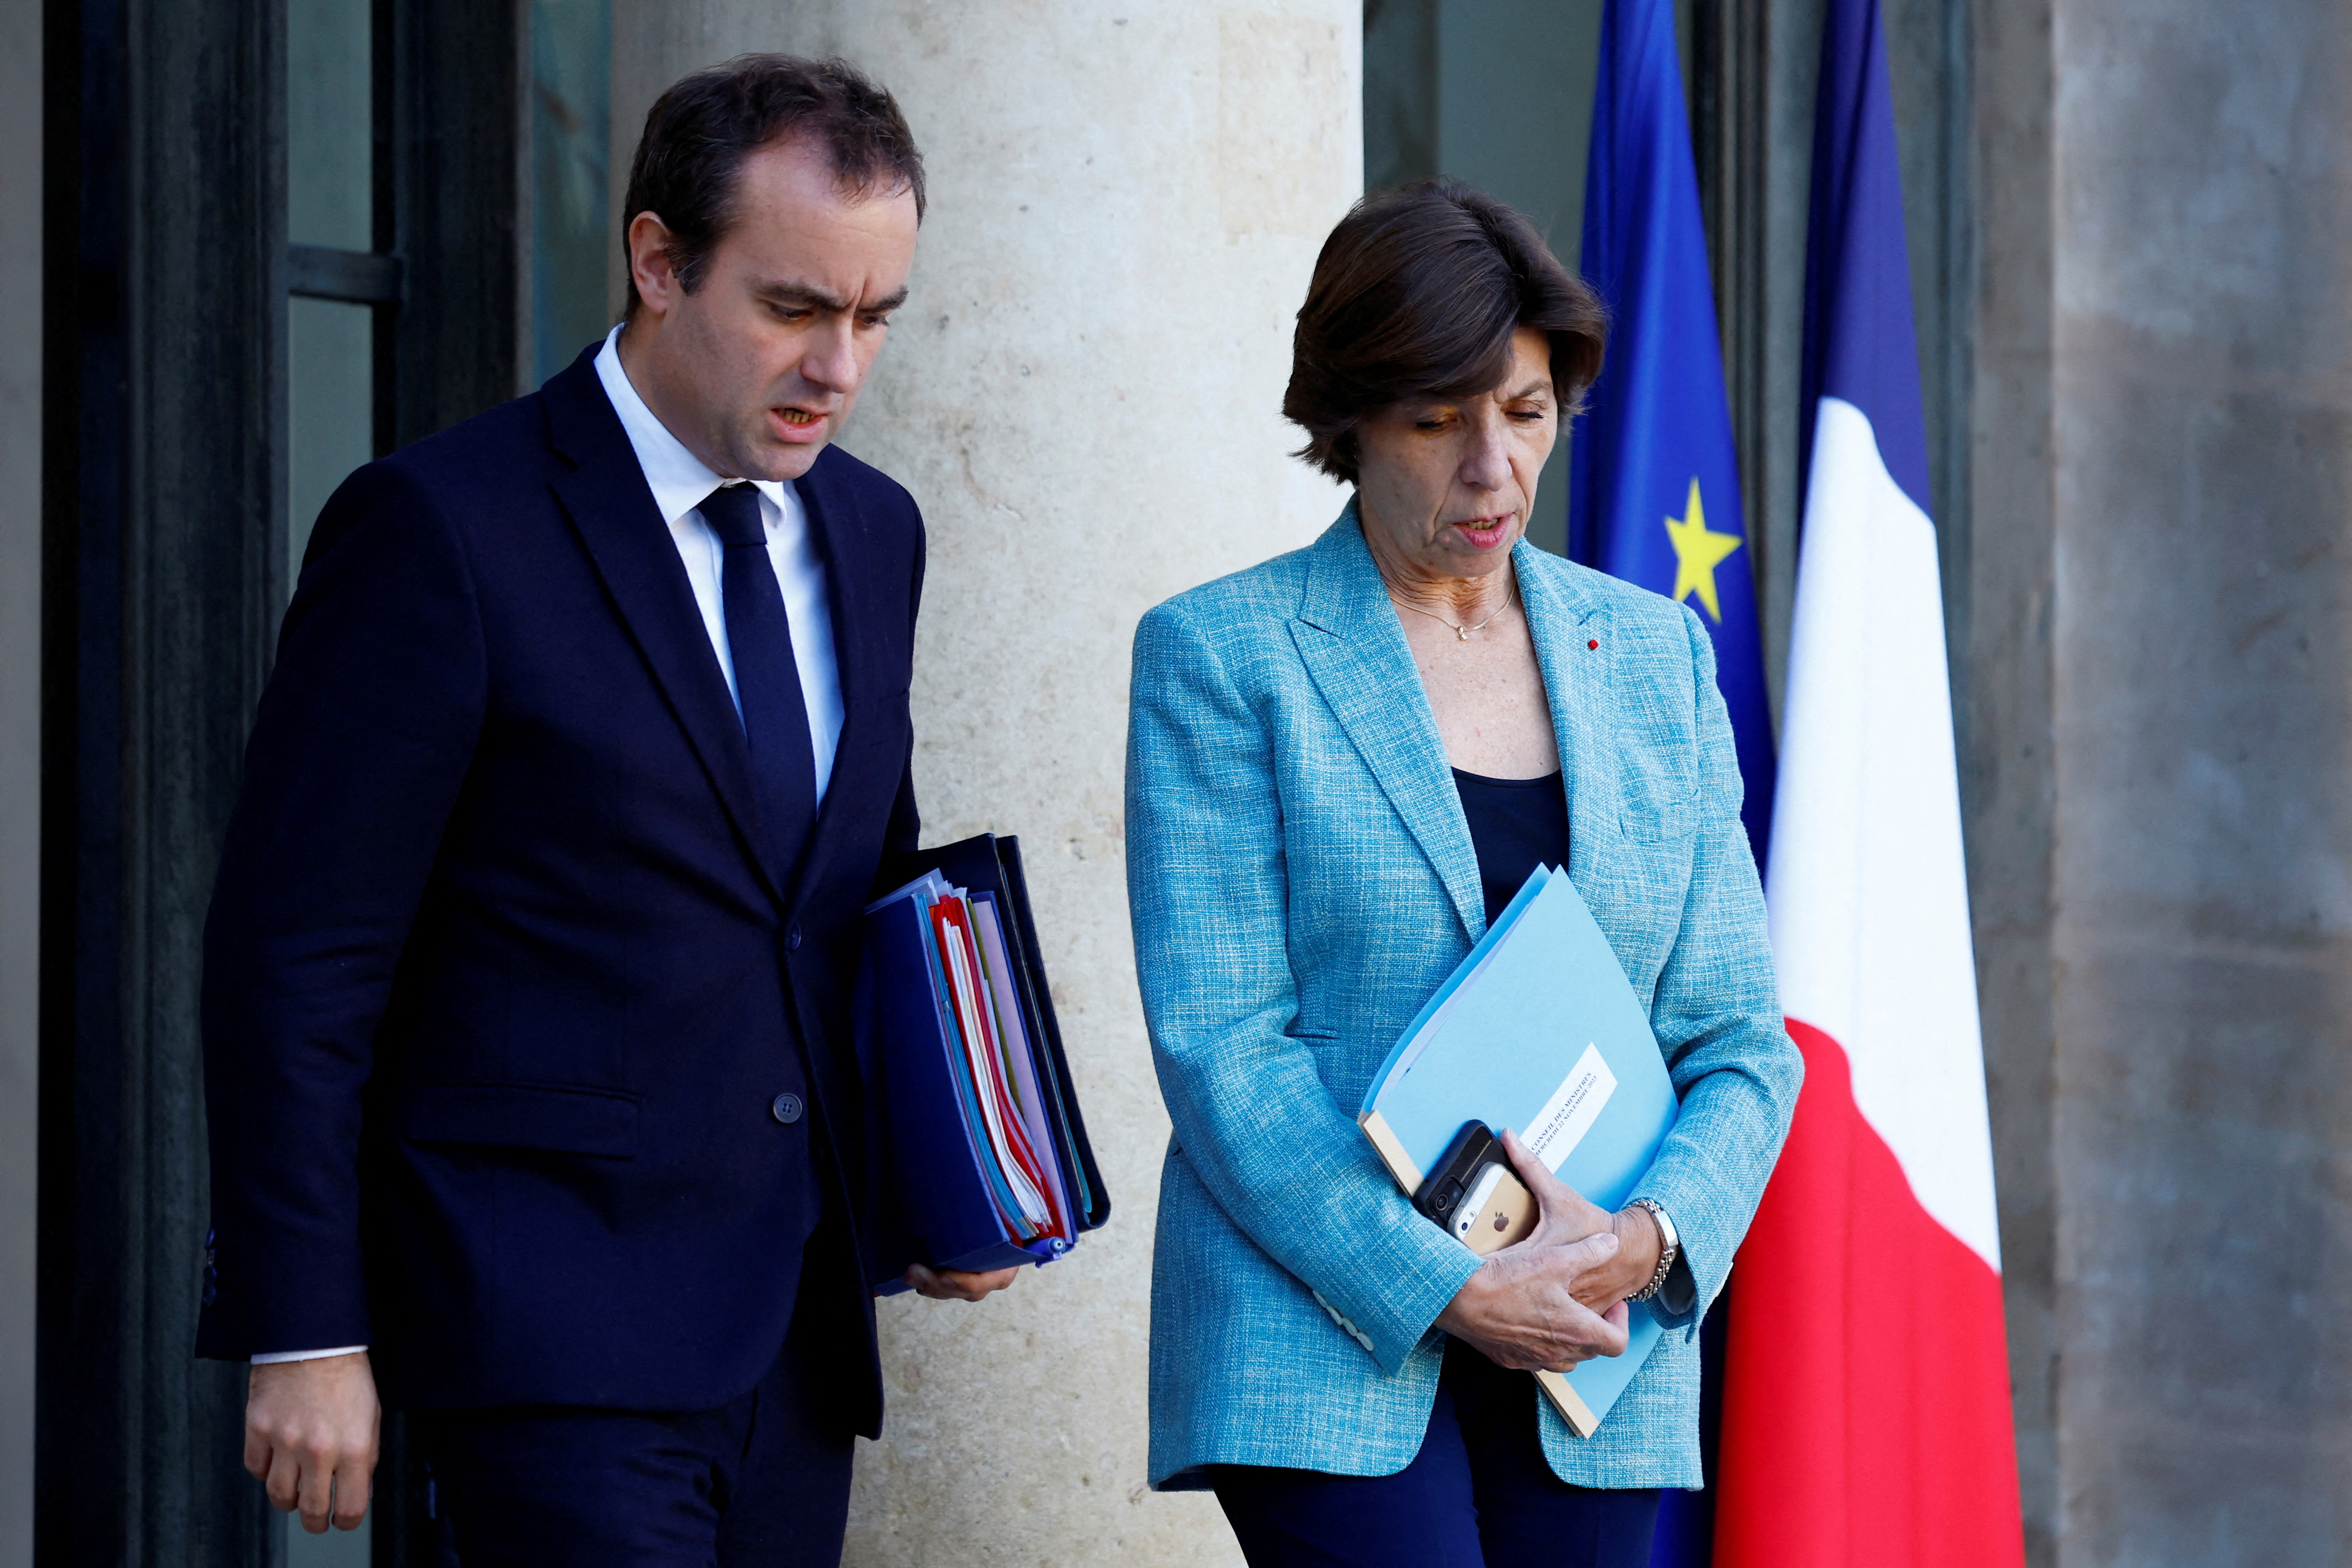 France Diplomacy - Ministry for Europe and Foreign Affairs